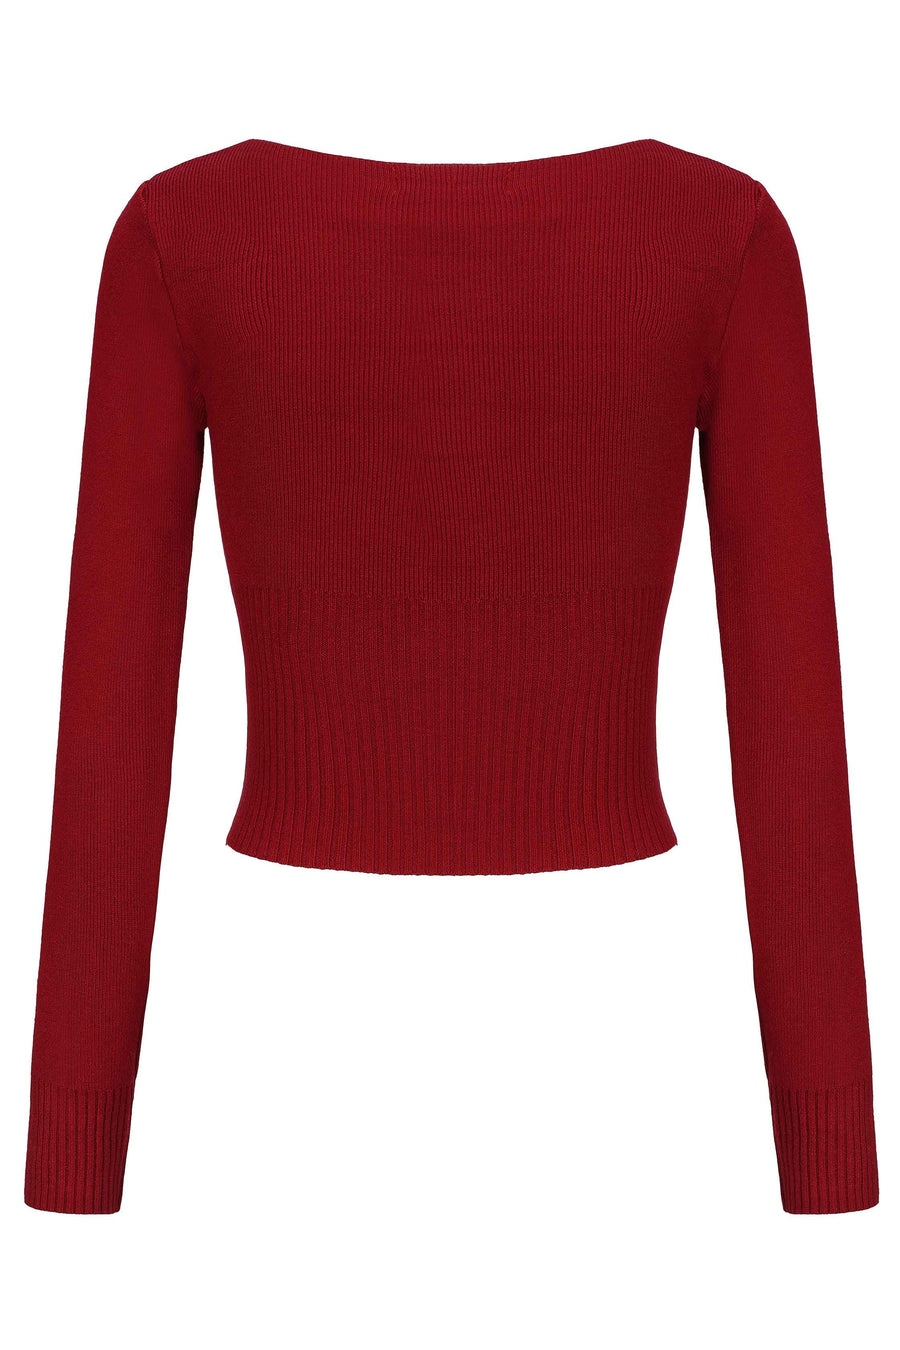 Andrea Cardigan - Red